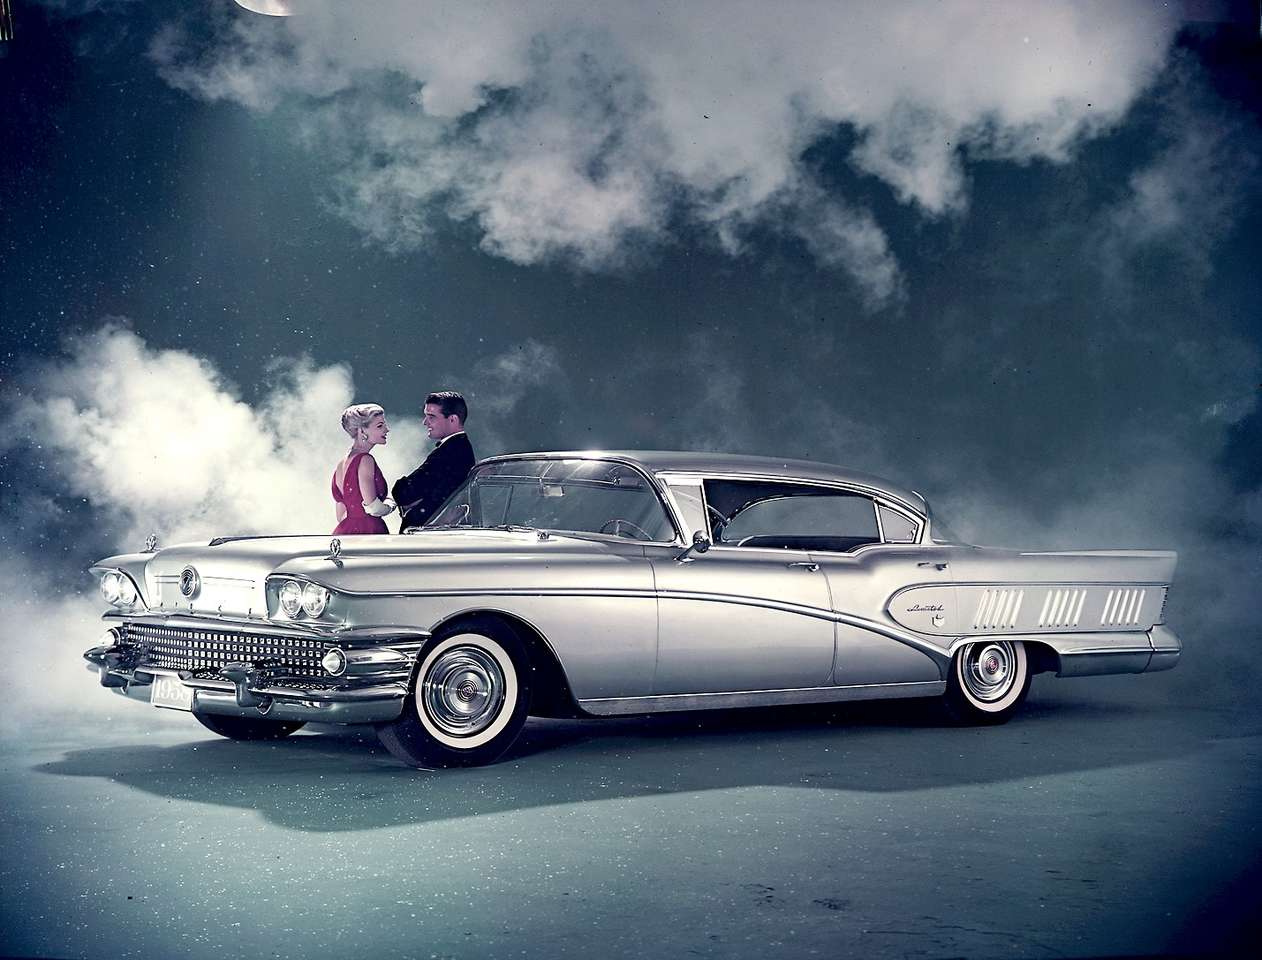 1958 Buick Limited online puzzle